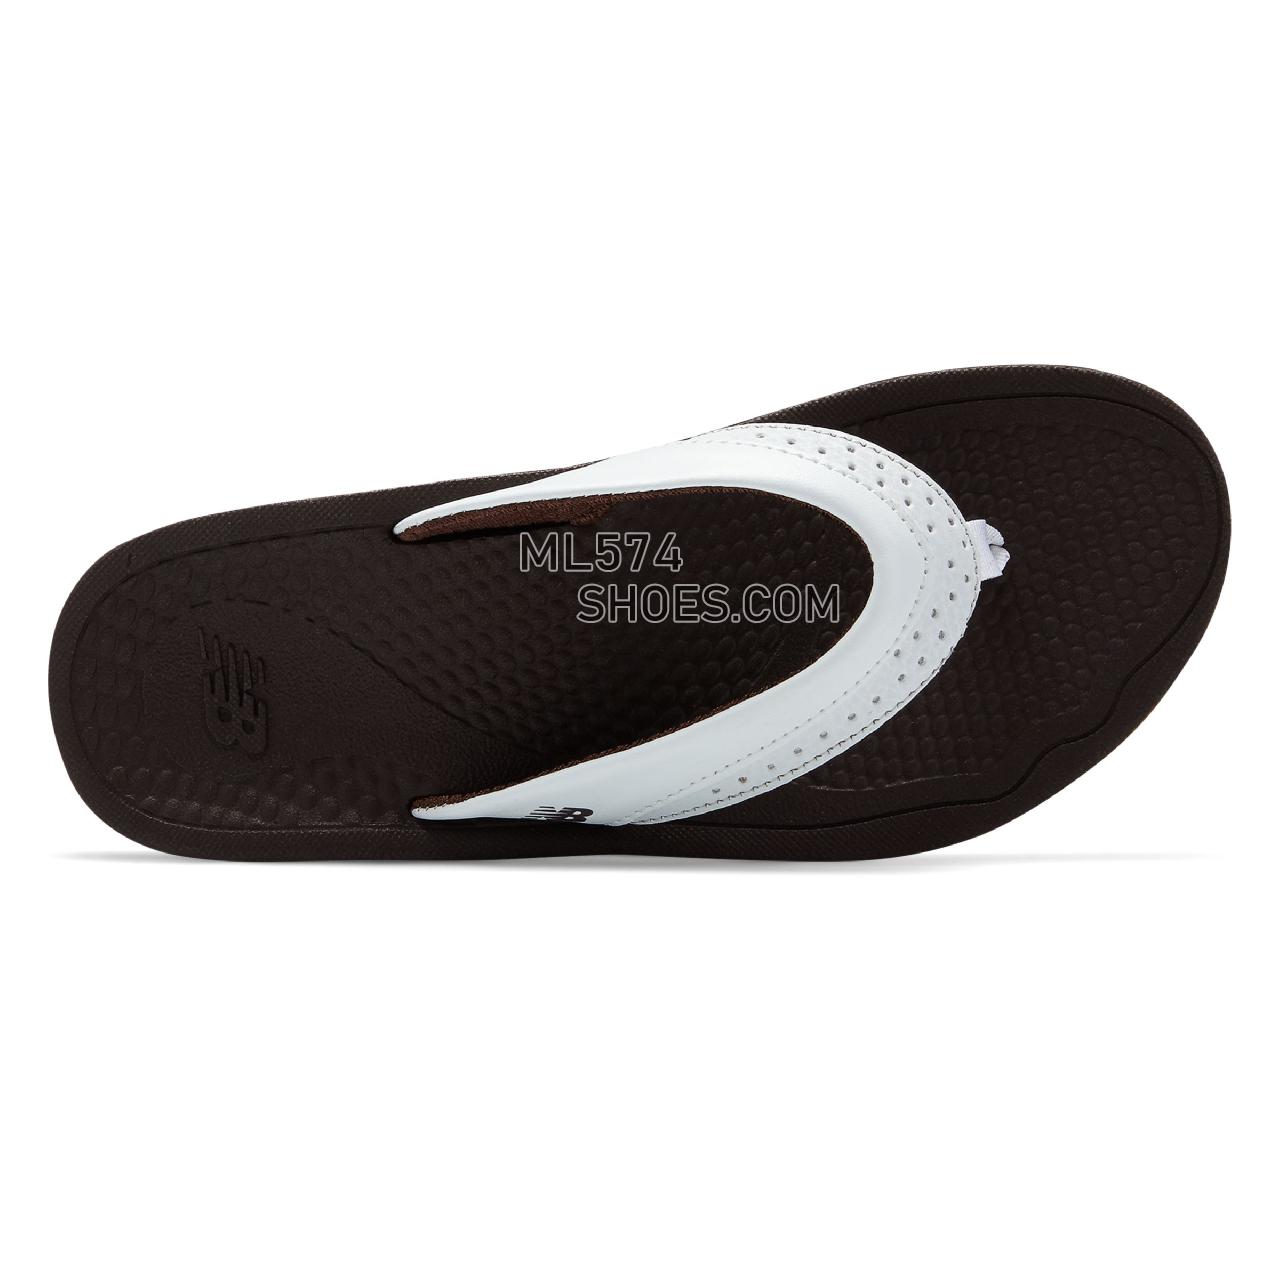 New Balance Renew Thong - Women's 6086 - Sandals Brown with White - W6086BRWT